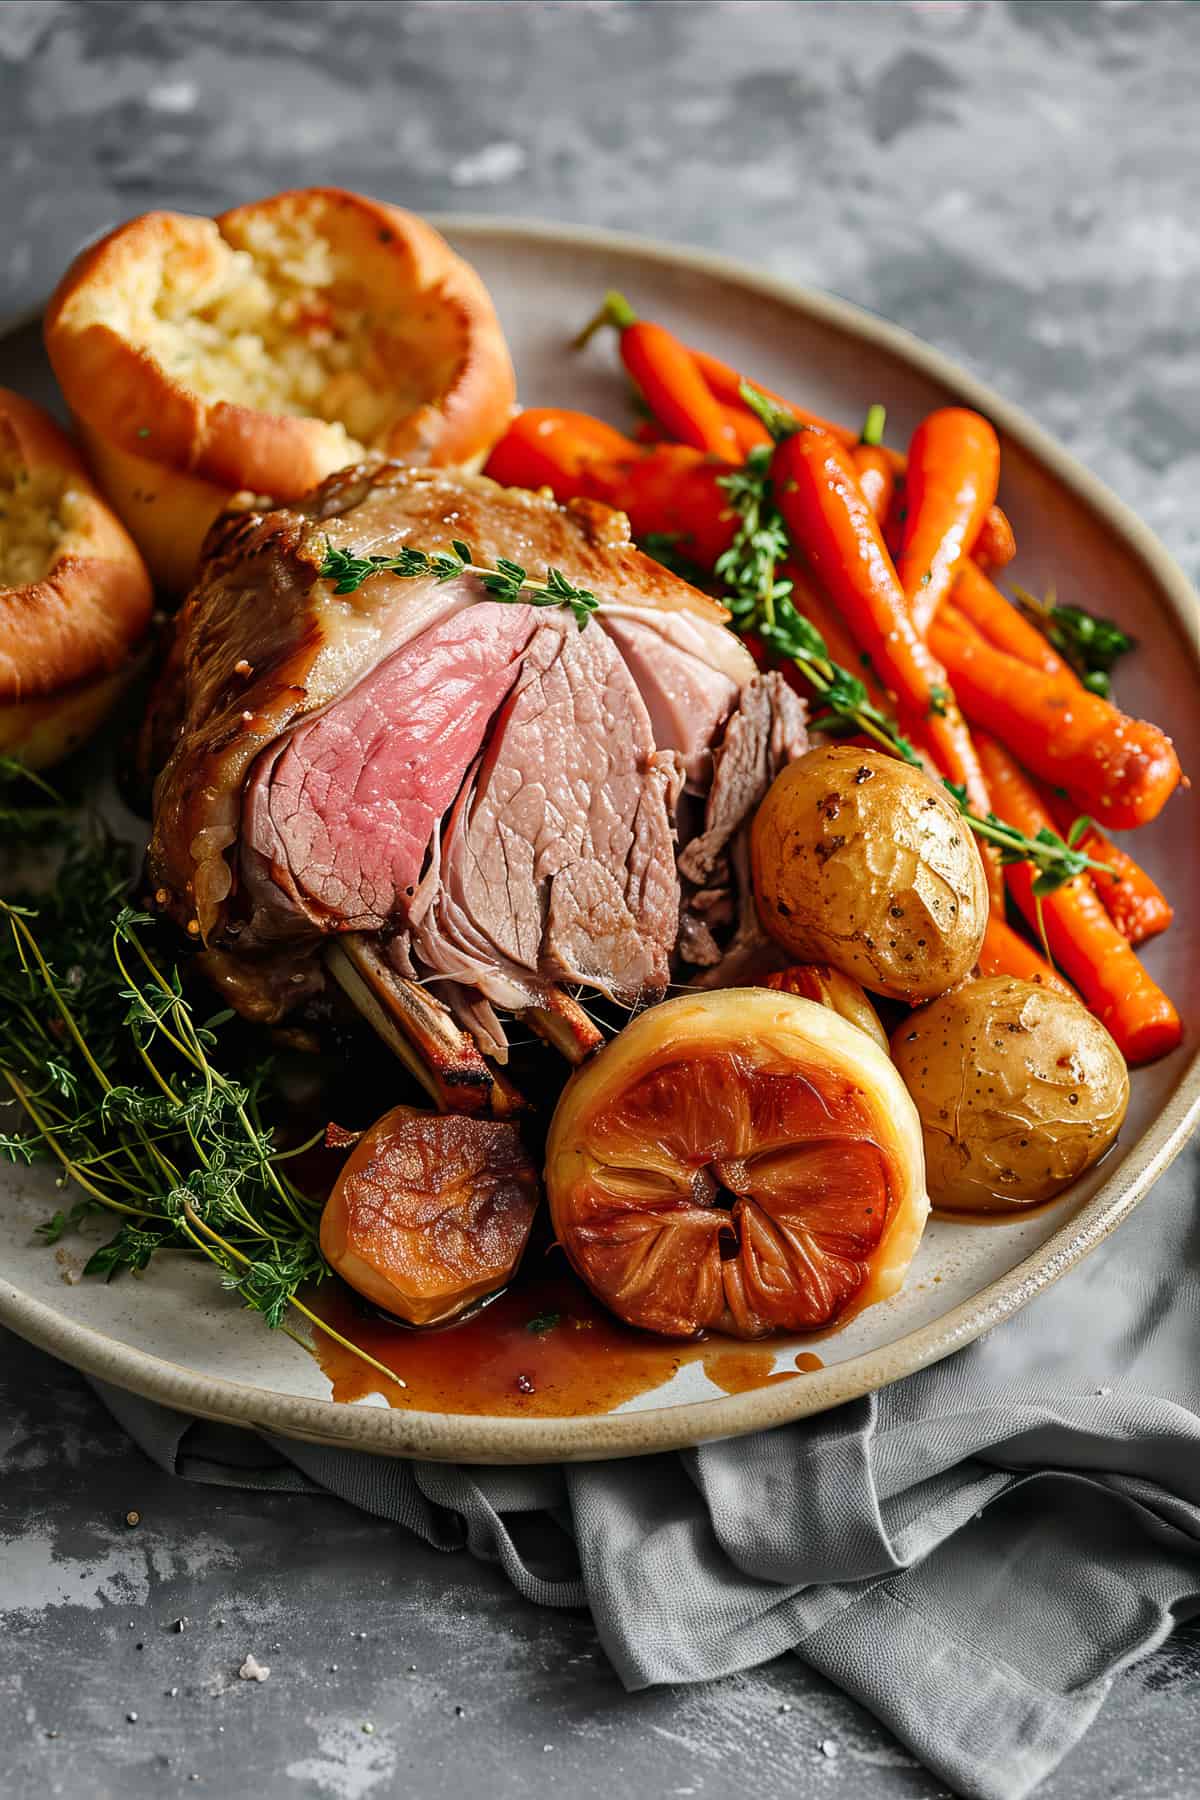 Roast leg of lamb with herbs, roast potatoes and glazed carrots on a plate.